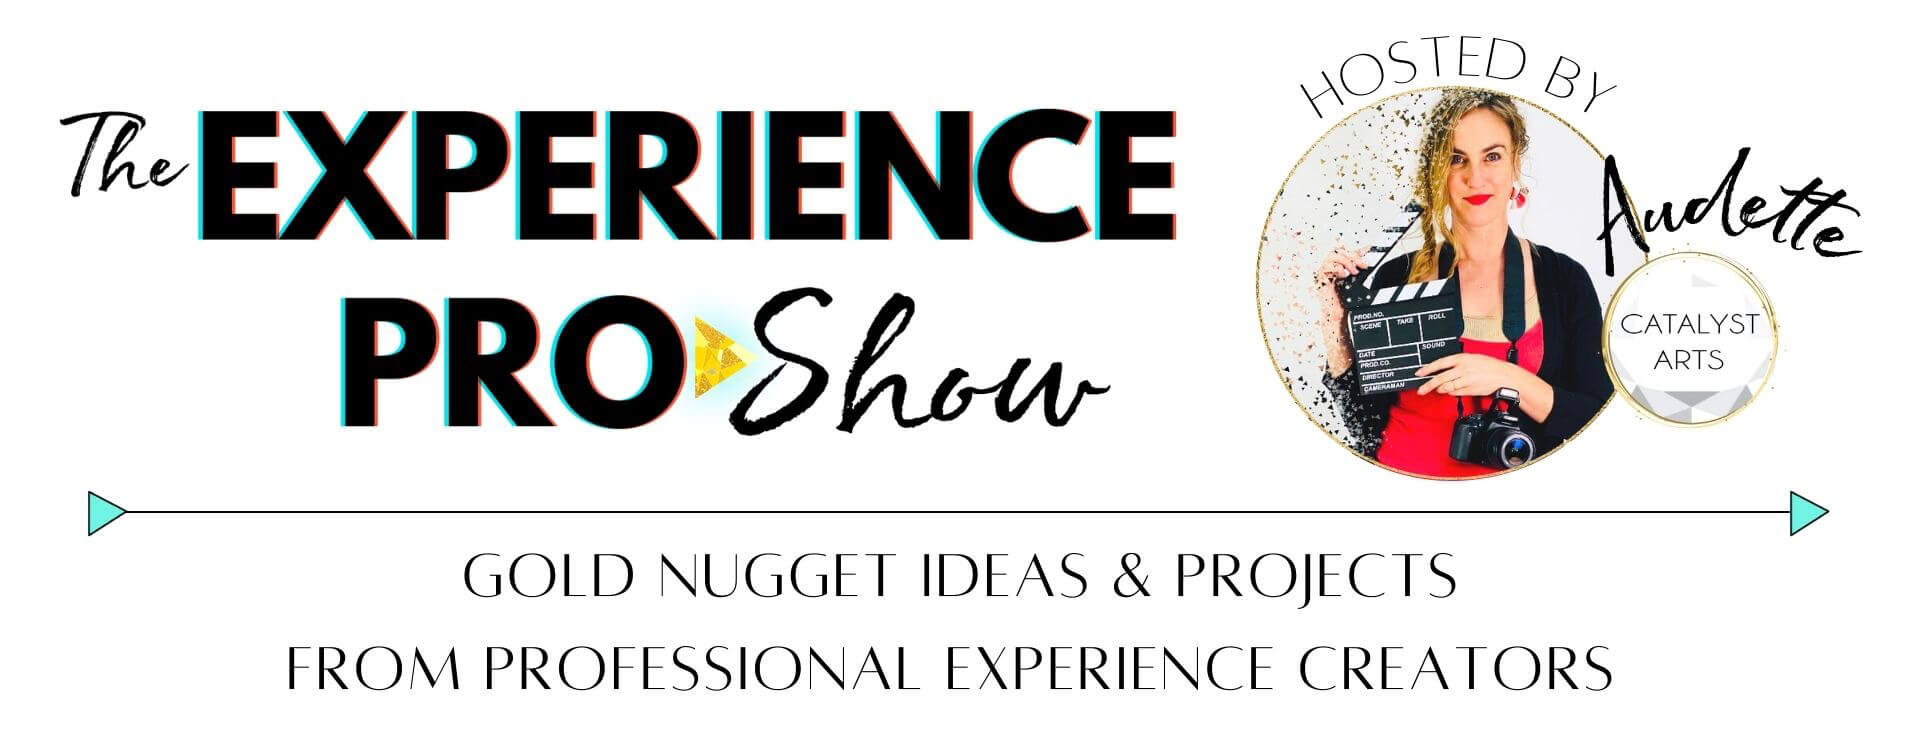 Experience Pro Show with Audette